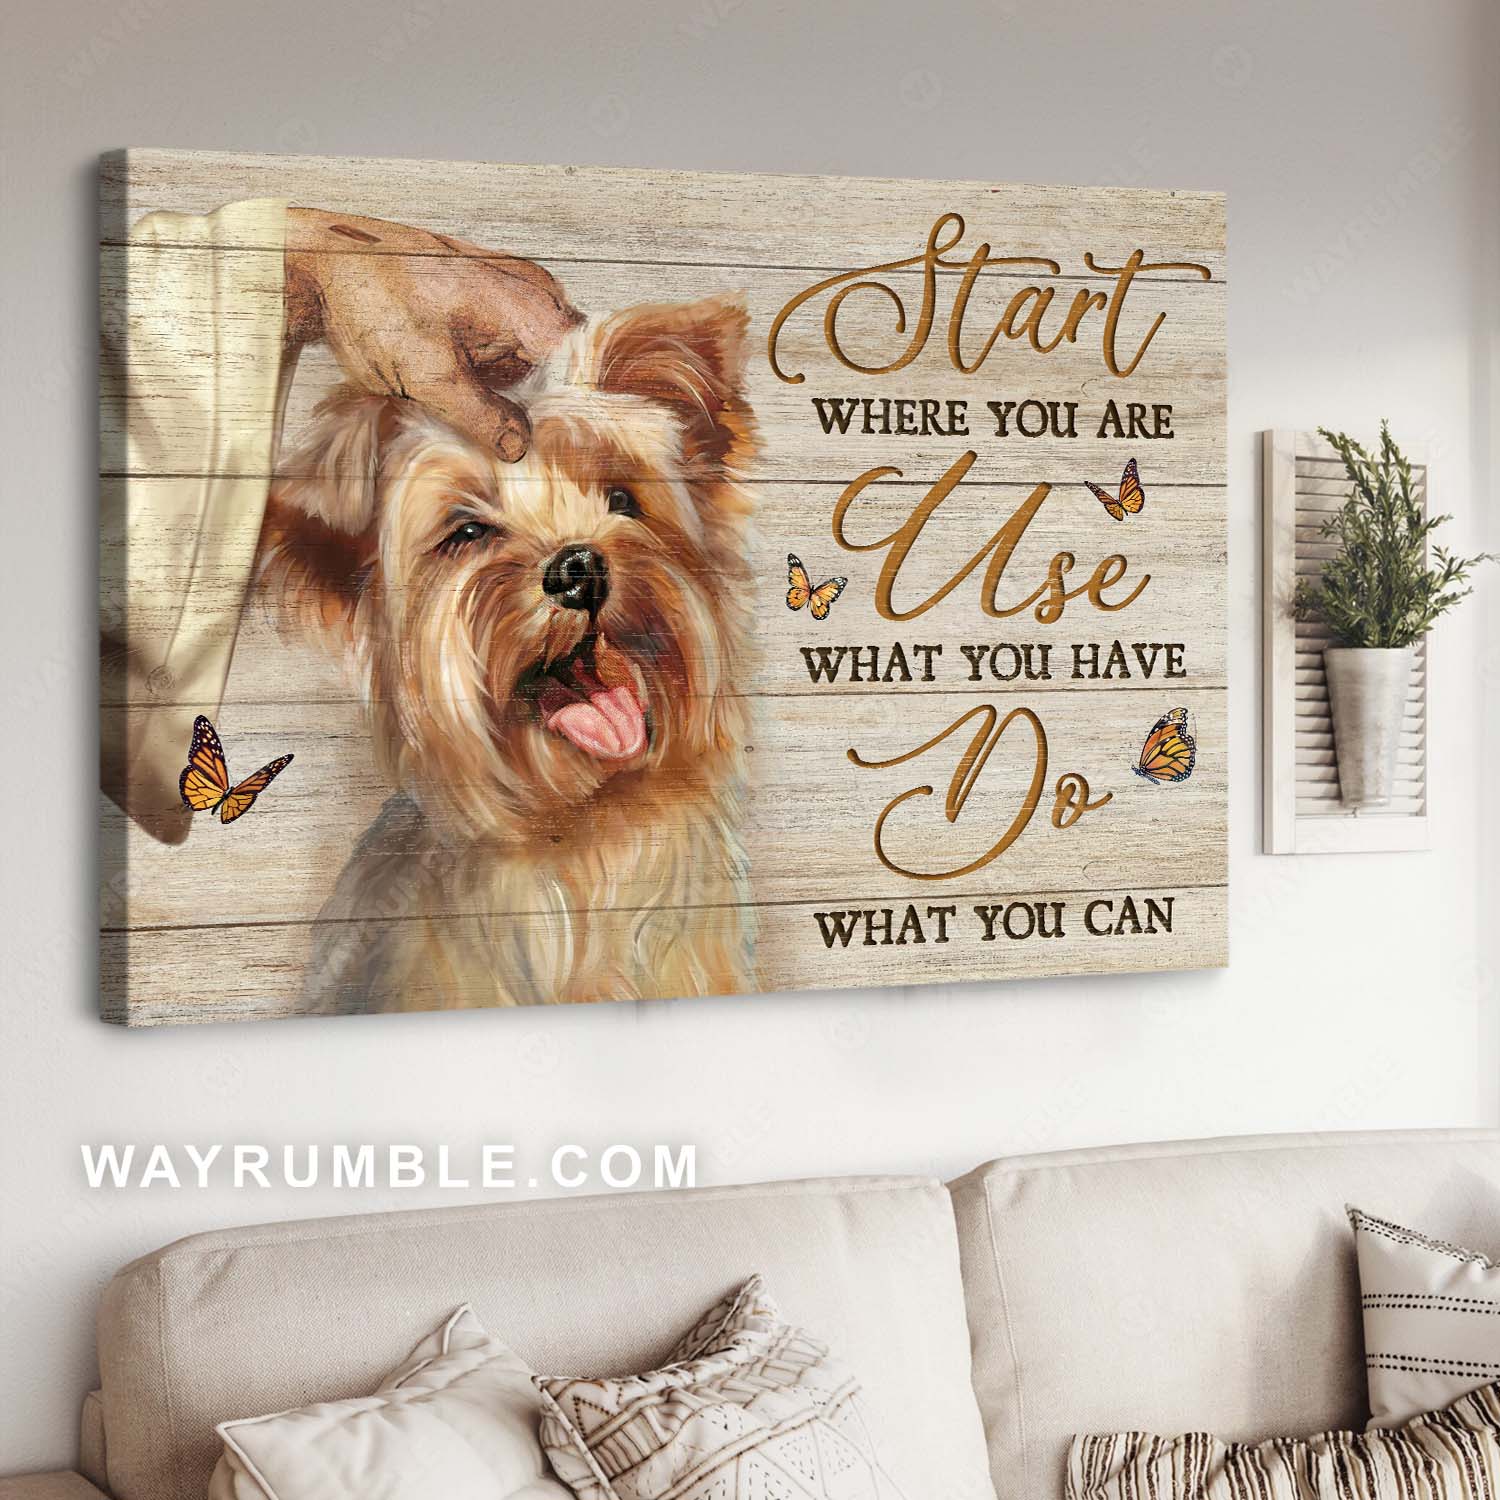 Yorkshire Terrier, Lovely dog, Inspirational quote, Start where you are - Jesus Landscape Canvas Prints, Home Decor Wall Art